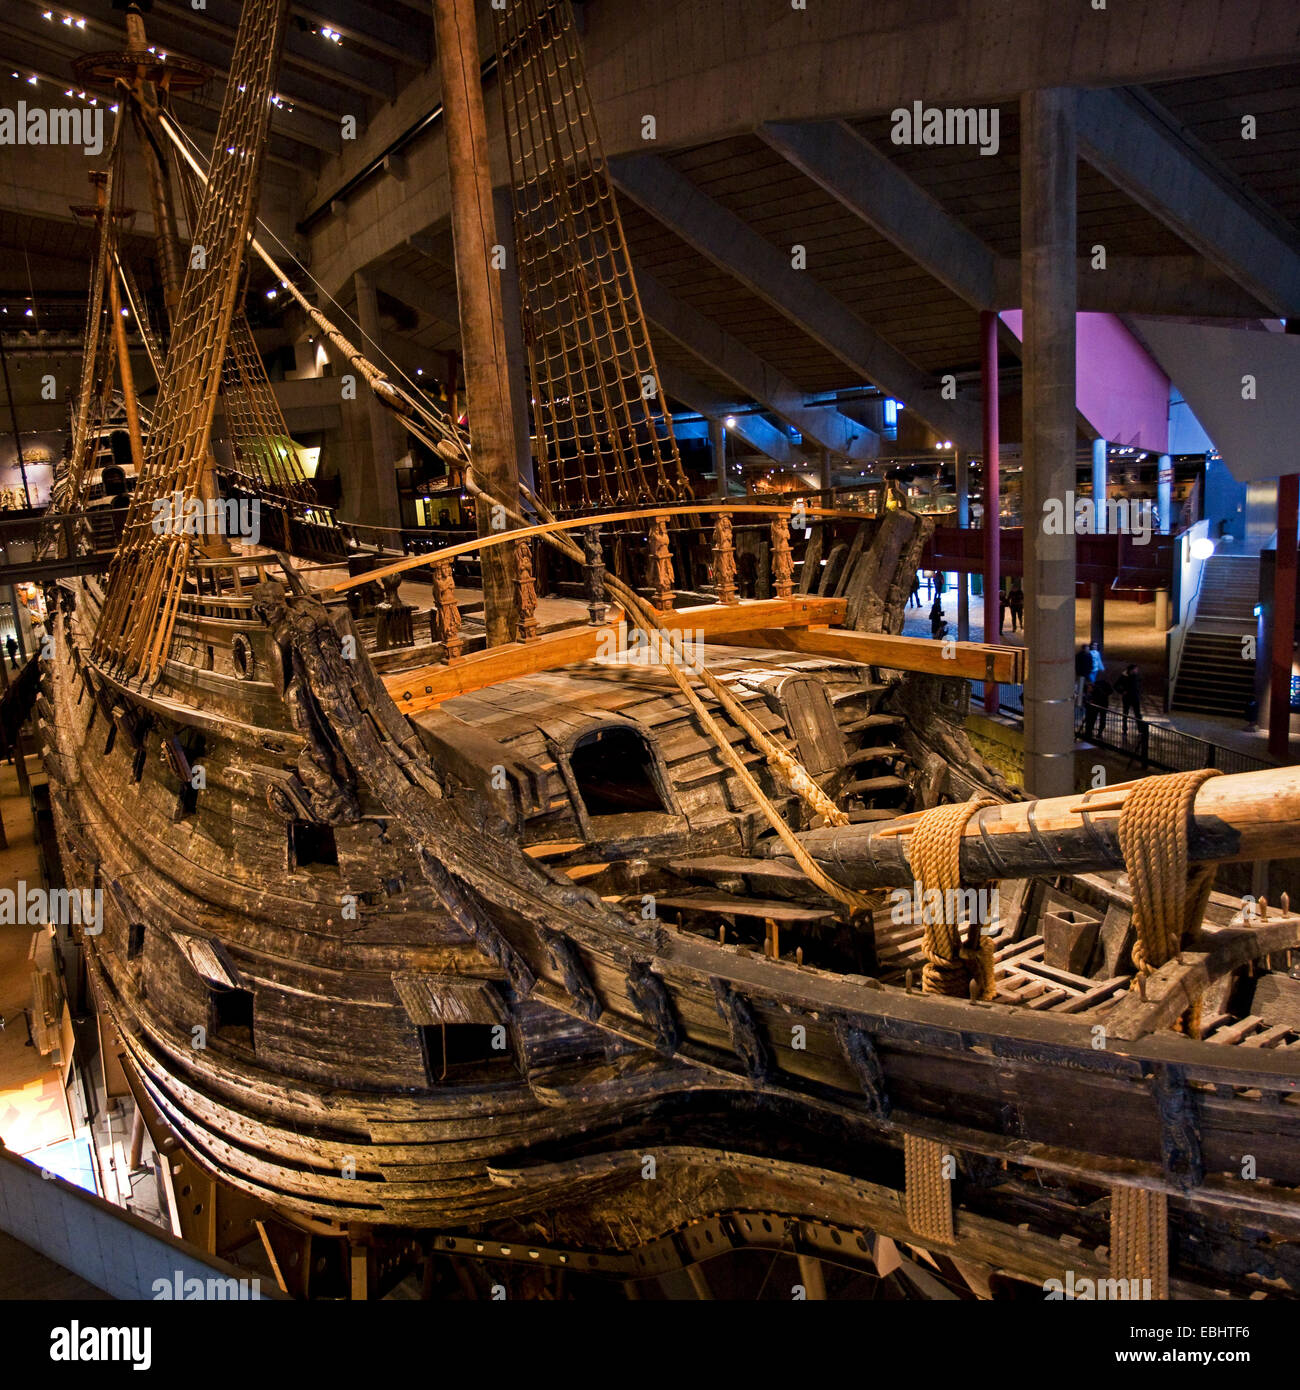 The Royal Swedish warship Vasa in its museum. It sank in 1628 and was found again in 1956. Stock Photo